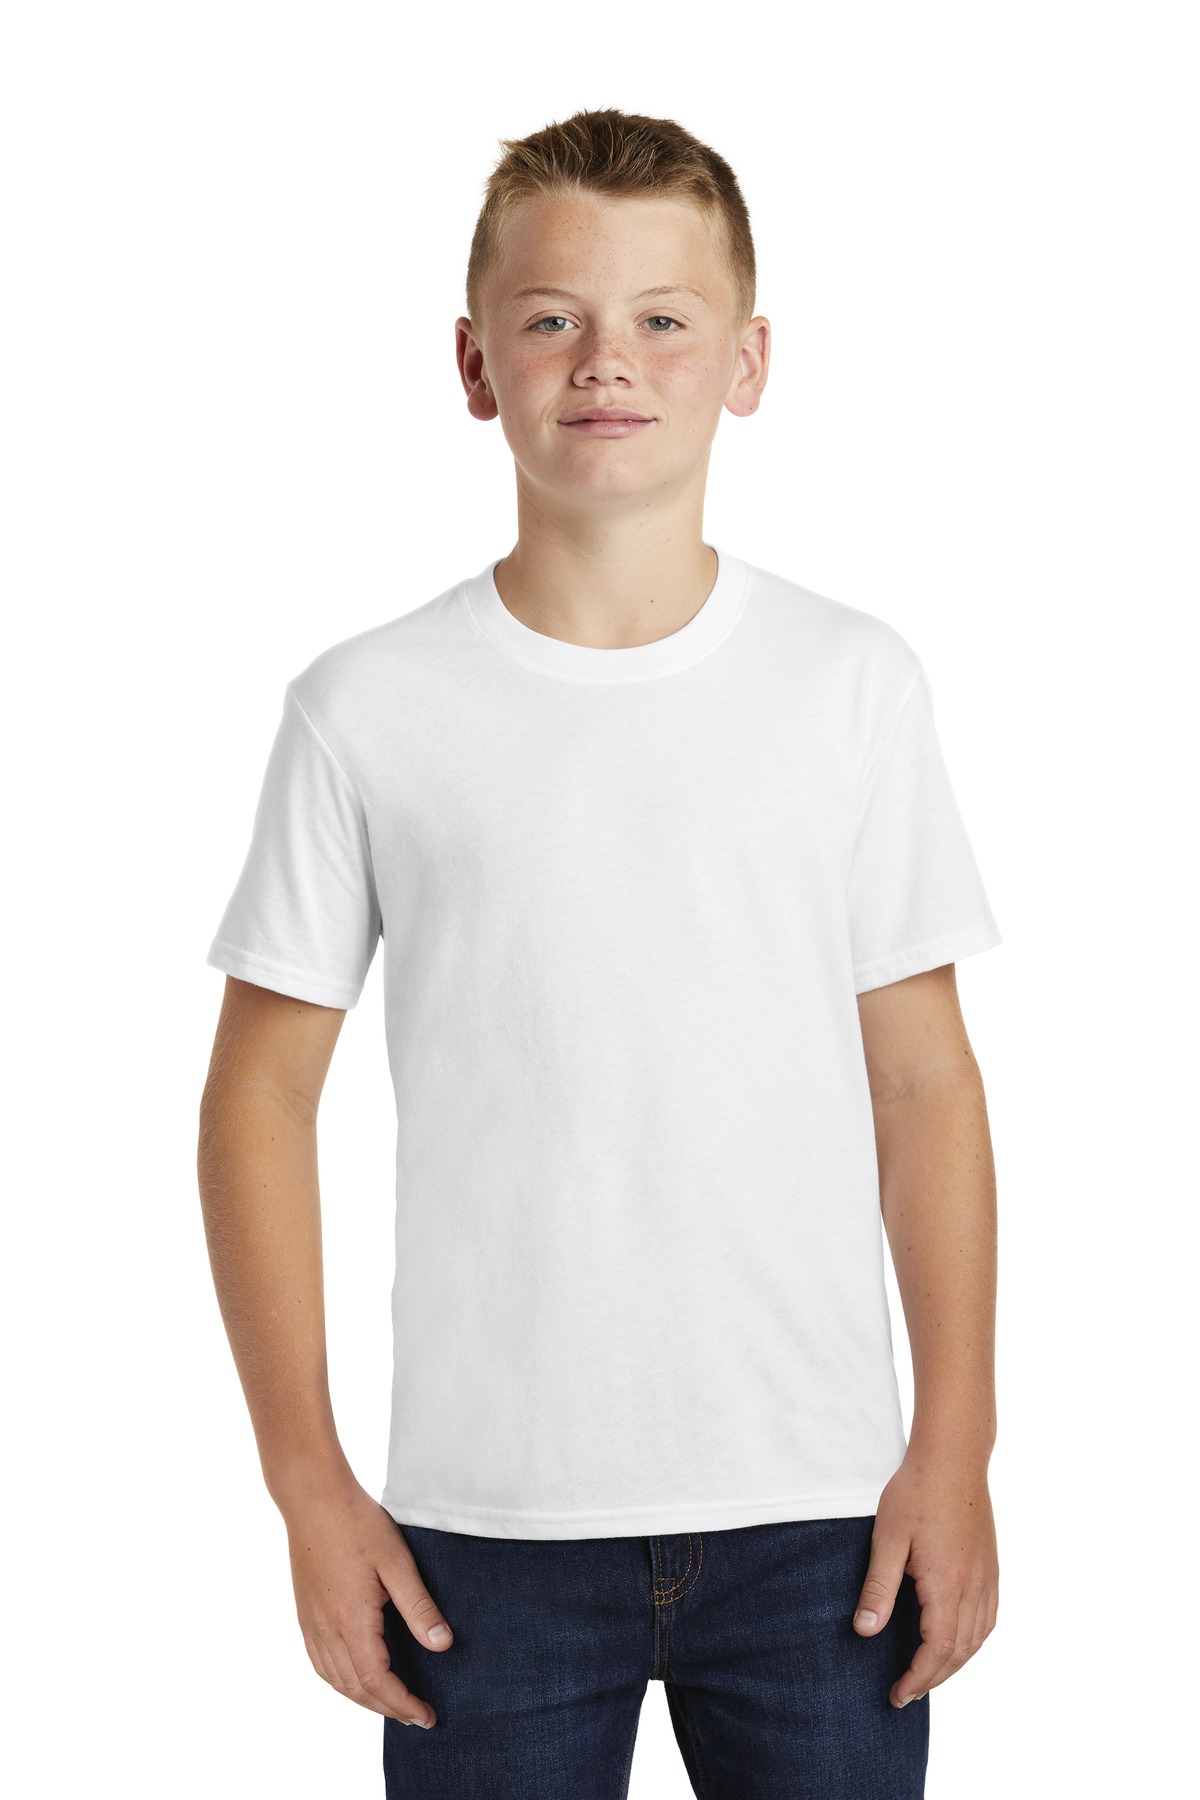 Port and Company Youth Fan Favorite Blend Tee. PC455Y